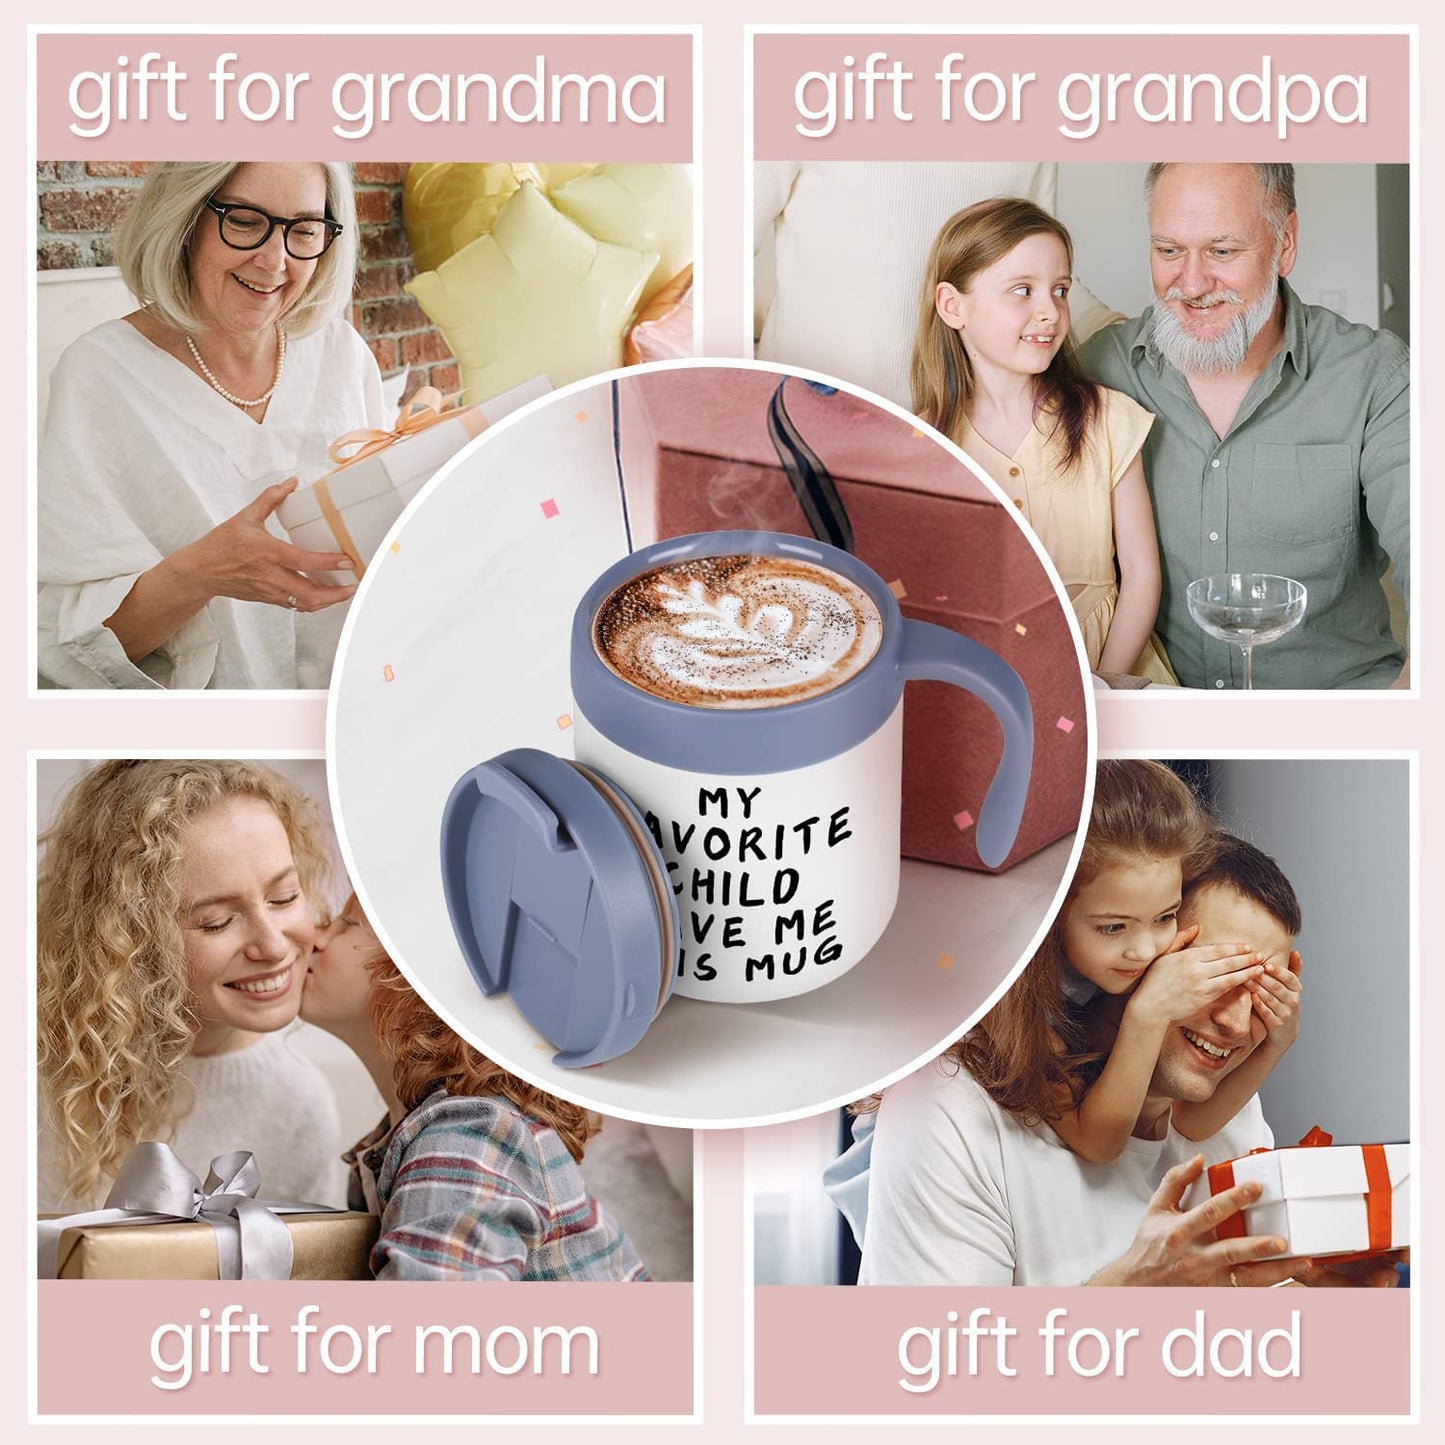 IDOKER Gift for Mom Dad Grandma Grandpa, Insulated Travel Tea Coffee Mug with Handle and Lid, Best Mom Dad Gifts, Dad Mom Mug for Birthday Christmas Mothers Fathers Gifts Day from Daughter/ Son.